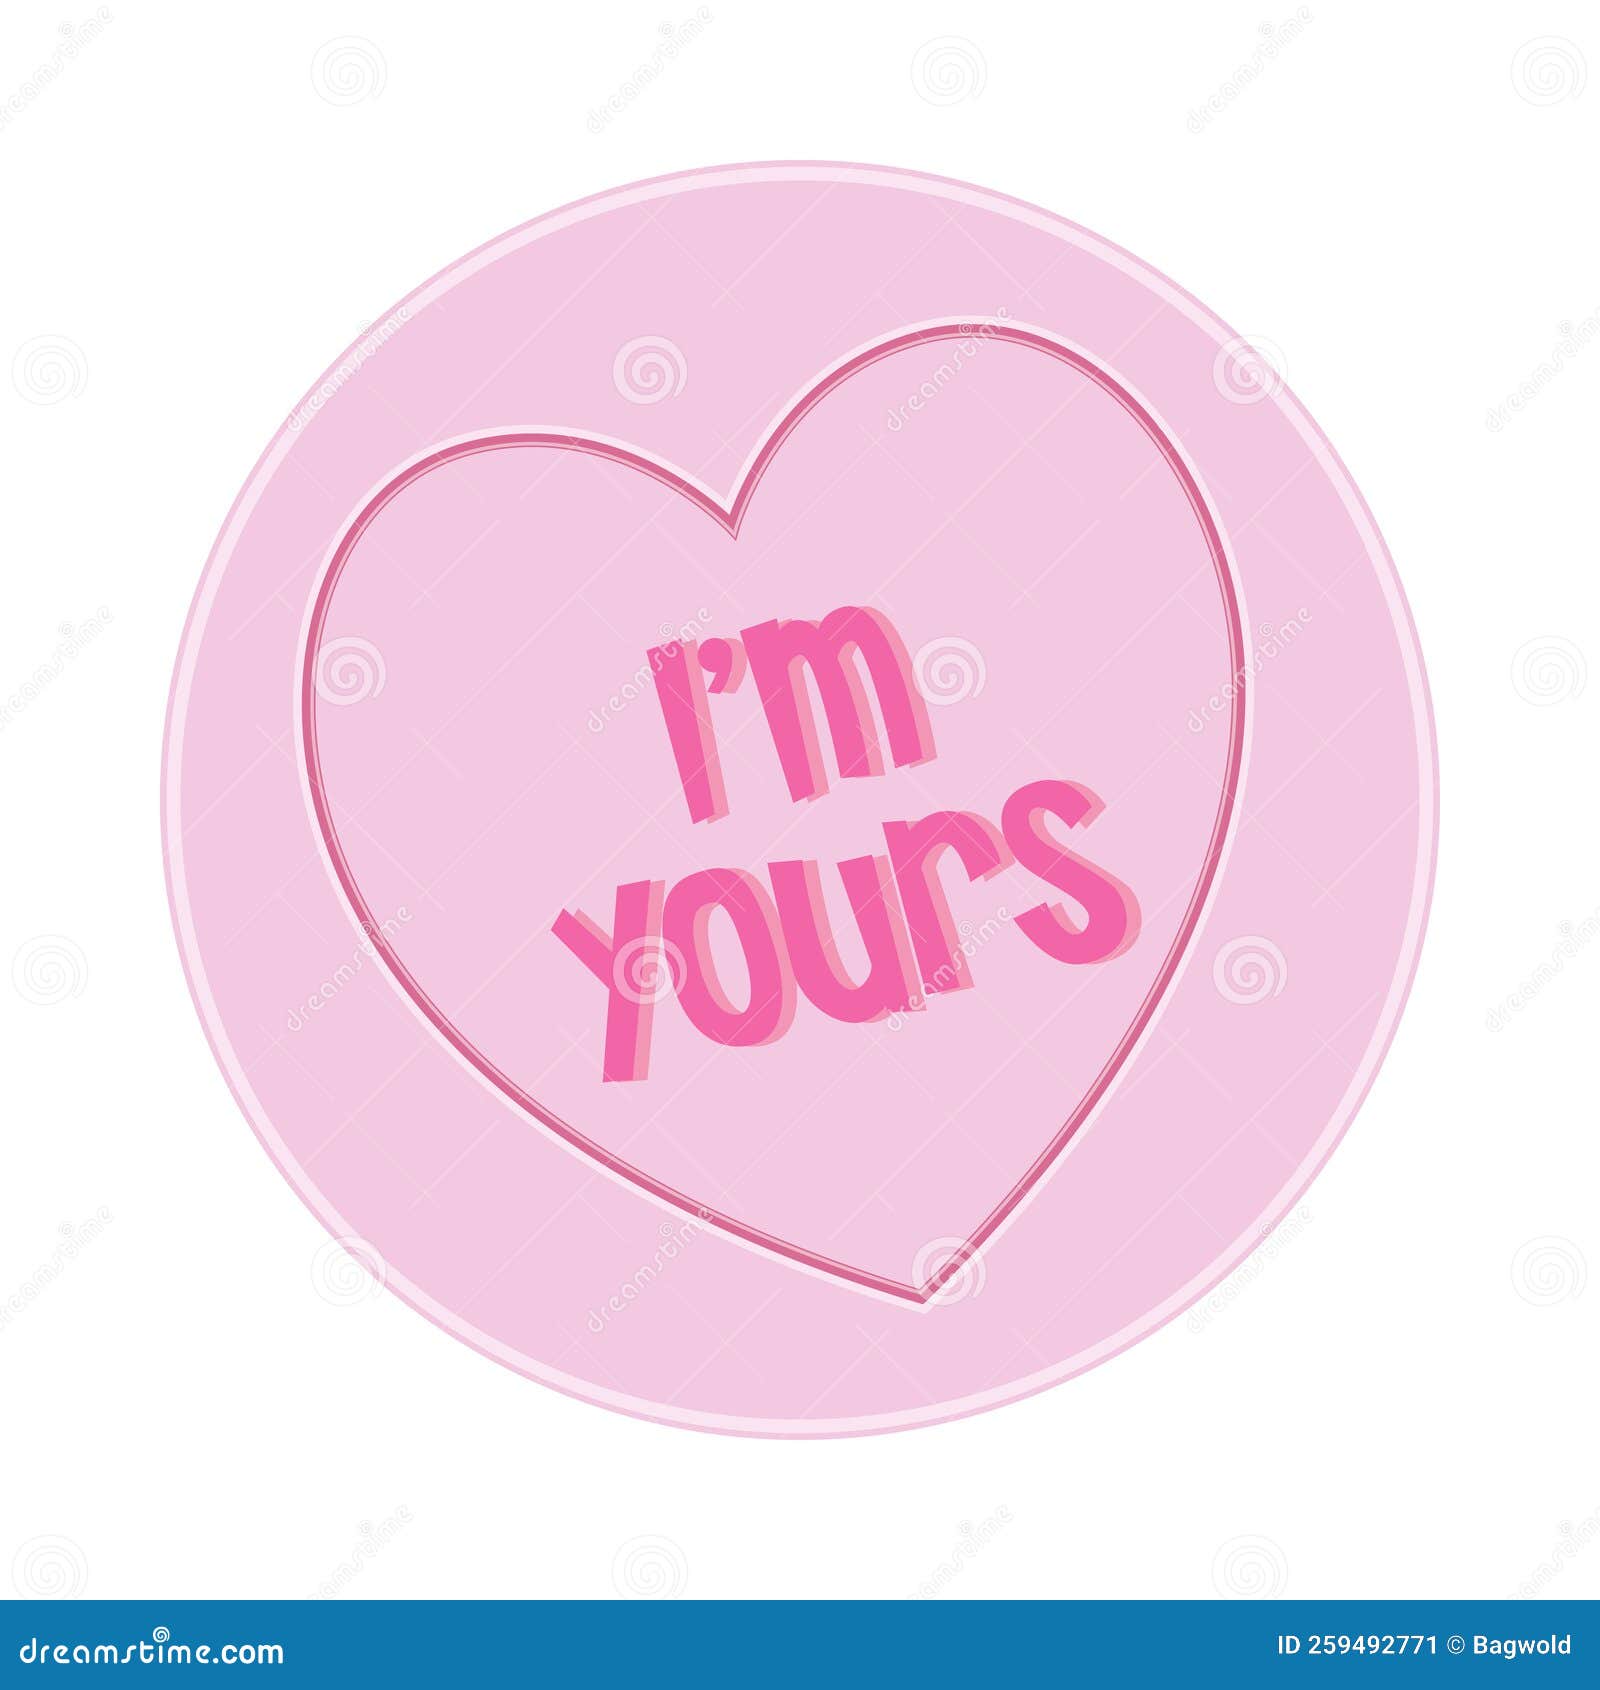 loveheart sweet candy - i'm yours message  